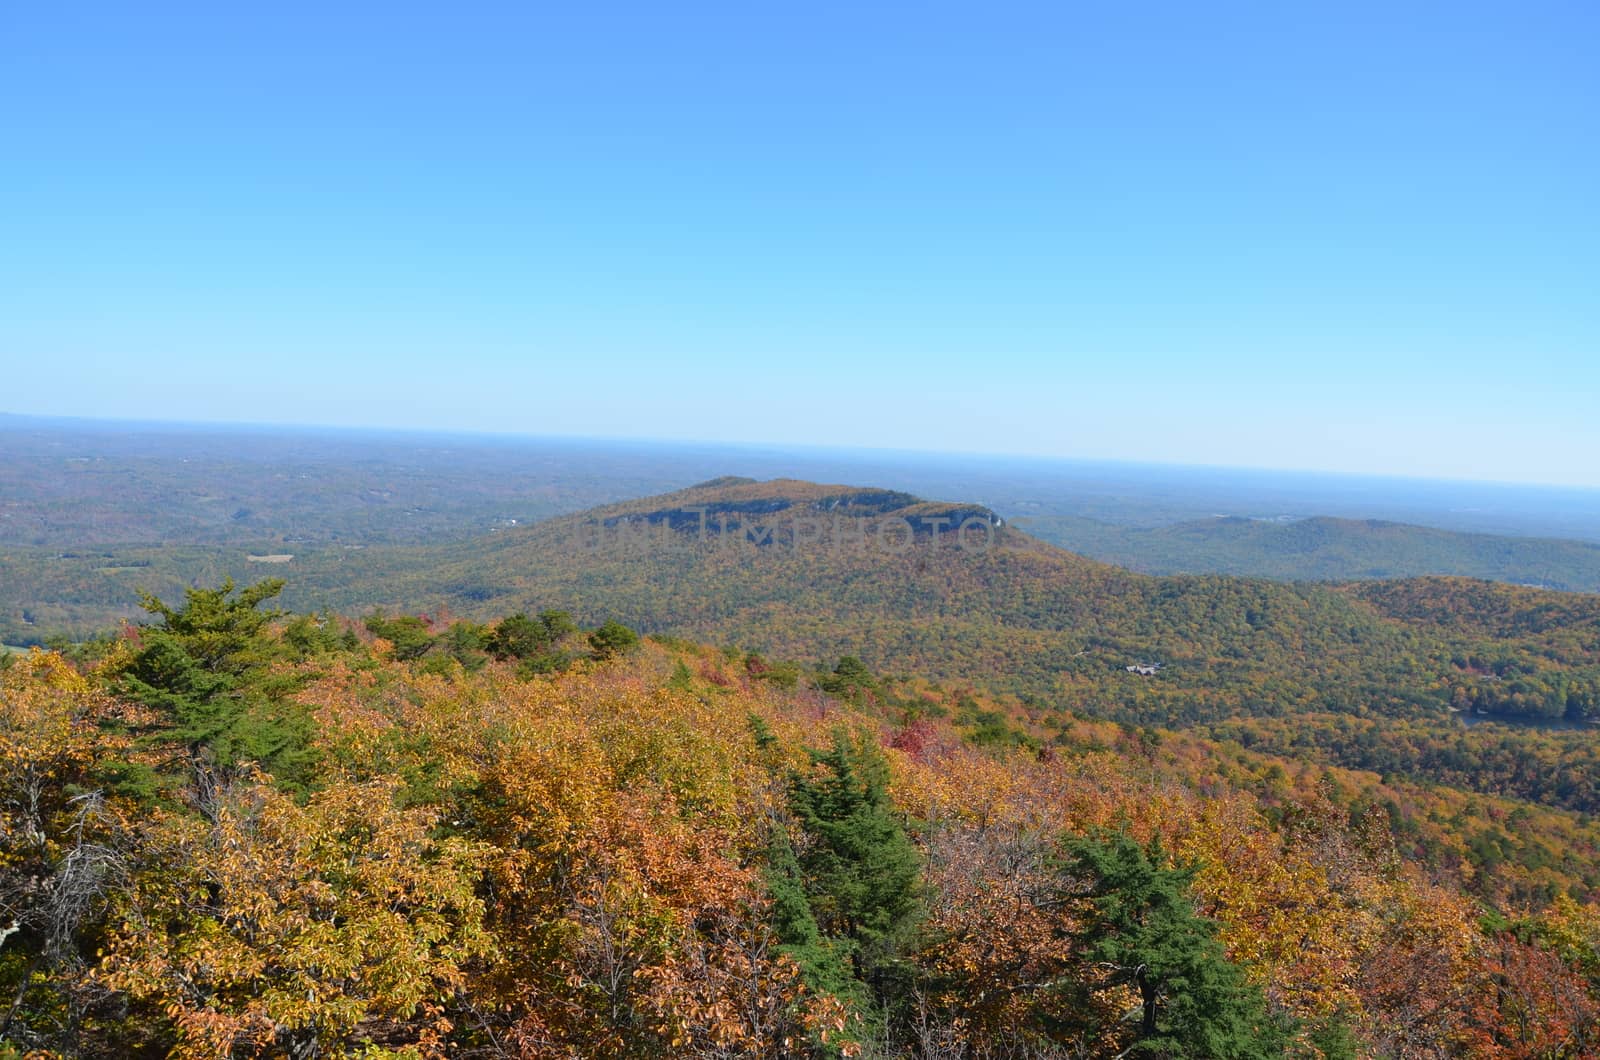 View of Hanging Rock from the tower at  Moores Wall. Seen in the fall of the year